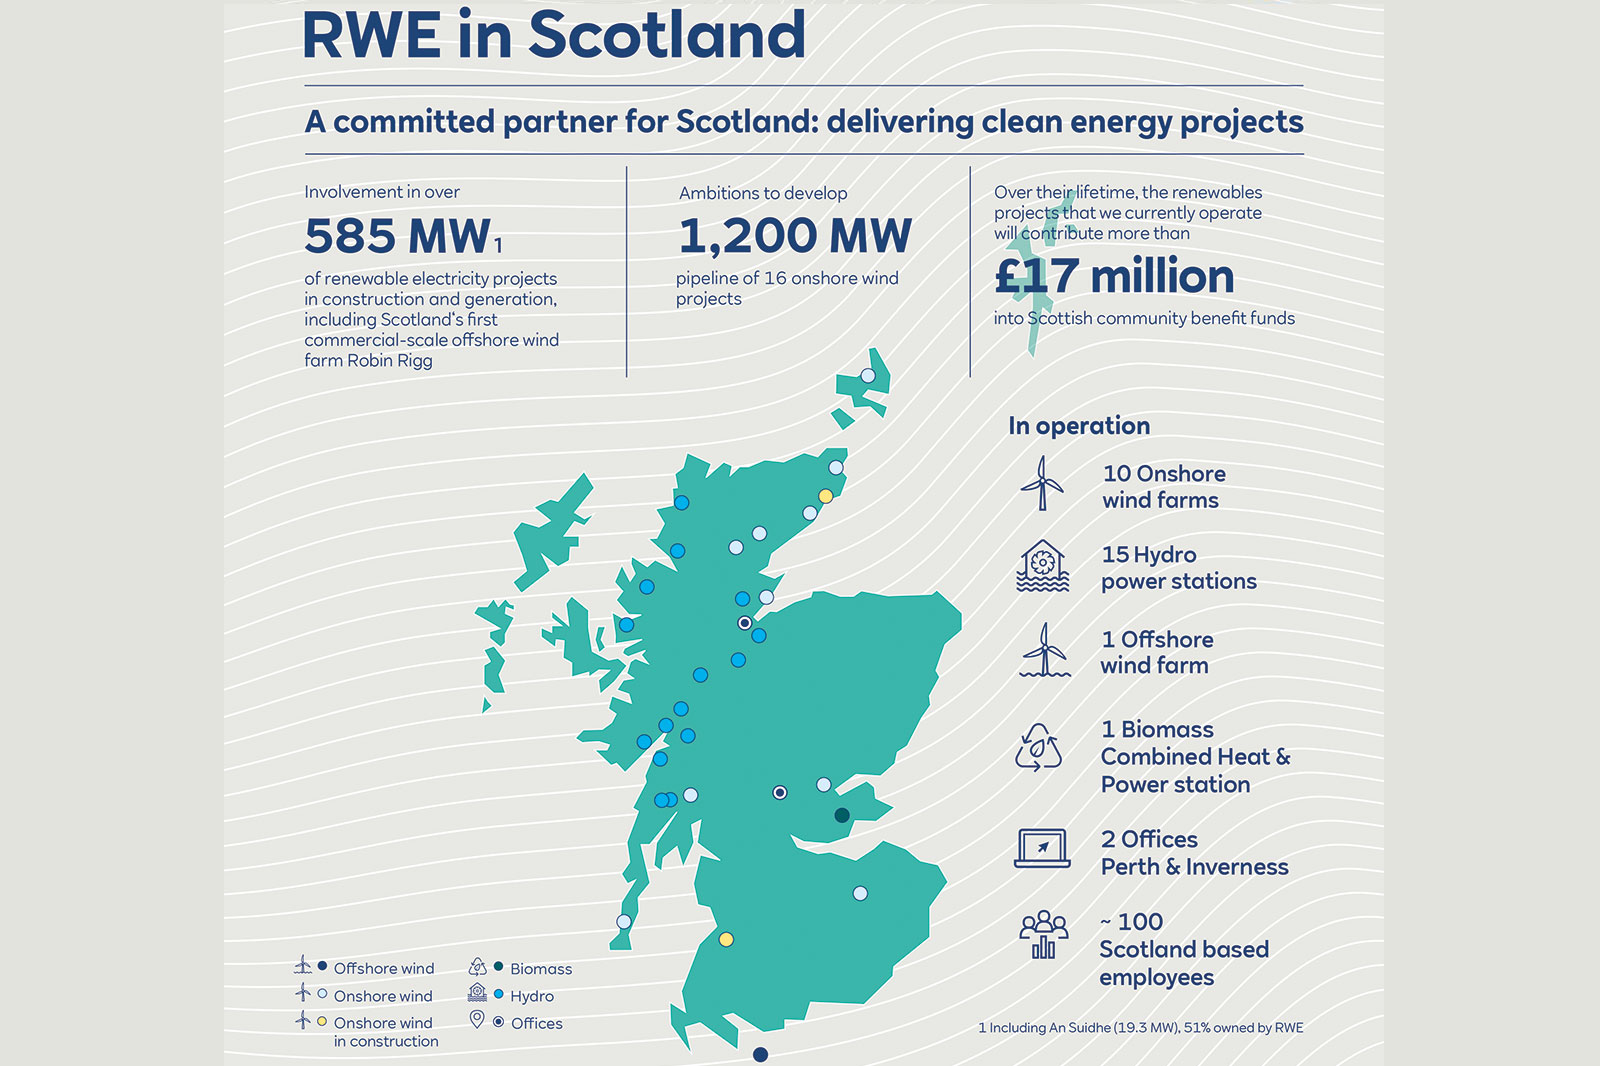 All locations and figures by RWE in Scotland